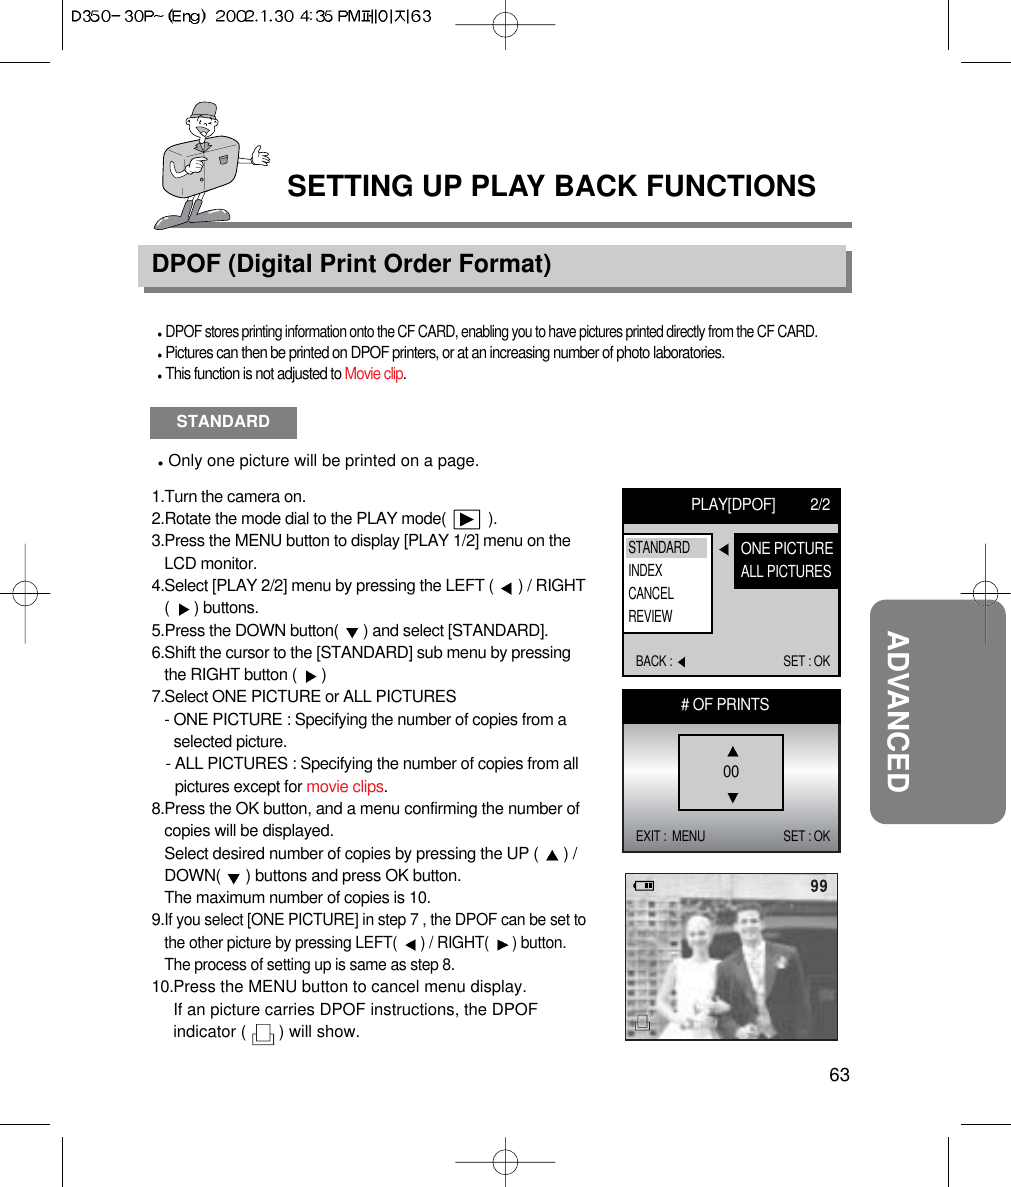 63ADVANCEDSETTING UP PLAY BACK FUNCTIONSDPOF (Digital Print Order Format)DPOF stores printing information onto the CF CARD, enabling you to have pictures printed directly from the CF CARD.Pictures can then be printed on DPOF printers, or at an increasing number of photo laboratories.This function is not adjusted to Movie clip.STANDARDOnly one picture will be printed on a page.1.Turn the camera on.2.Rotate the mode dial to the PLAY mode(          ).3.Press the MENU button to display [PLAY 1/2] menu on theLCD monitor.4.Select [PLAY 2/2] menu by pressing the LEFT (  ) / RIGHT(  ) buttons.5.Press the DOWN button(  ) and select [STANDARD].6.Shift the cursor to the [STANDARD] sub menu by pressingthe RIGHT button (  ) 7.Select ONE PICTURE or ALL PICTURES- ONE PICTURE : Specifying the number of copies from aselected picture.- ALL PICTURES : Specifying the number of copies from allpictures except for movie clips.8.Press the OK button, and a menu confirming the number ofcopies will be displayed.Select desired number of copies by pressing the UP (  ) /DOWN(  ) buttons and press OK button.The maximum number of copies is 10.9.If you select [ONE PICTURE] in step 7 , the DPOF can be set tothe other picture by pressing LEFT(  ) / RIGHT(  ) button.The process of setting up is same as step 8.10.Press the MENU button to cancel menu display.If an picture carries DPOF instructions, the DPOFindicator (       ) will show.PLAY[DPOF] 2/2BACK :  SET : OKONE PICTUREALL PICTURESSTANDARDINDEXCANCELREVIEW# OF PRINTSEXIT :  MENU SET : OK00